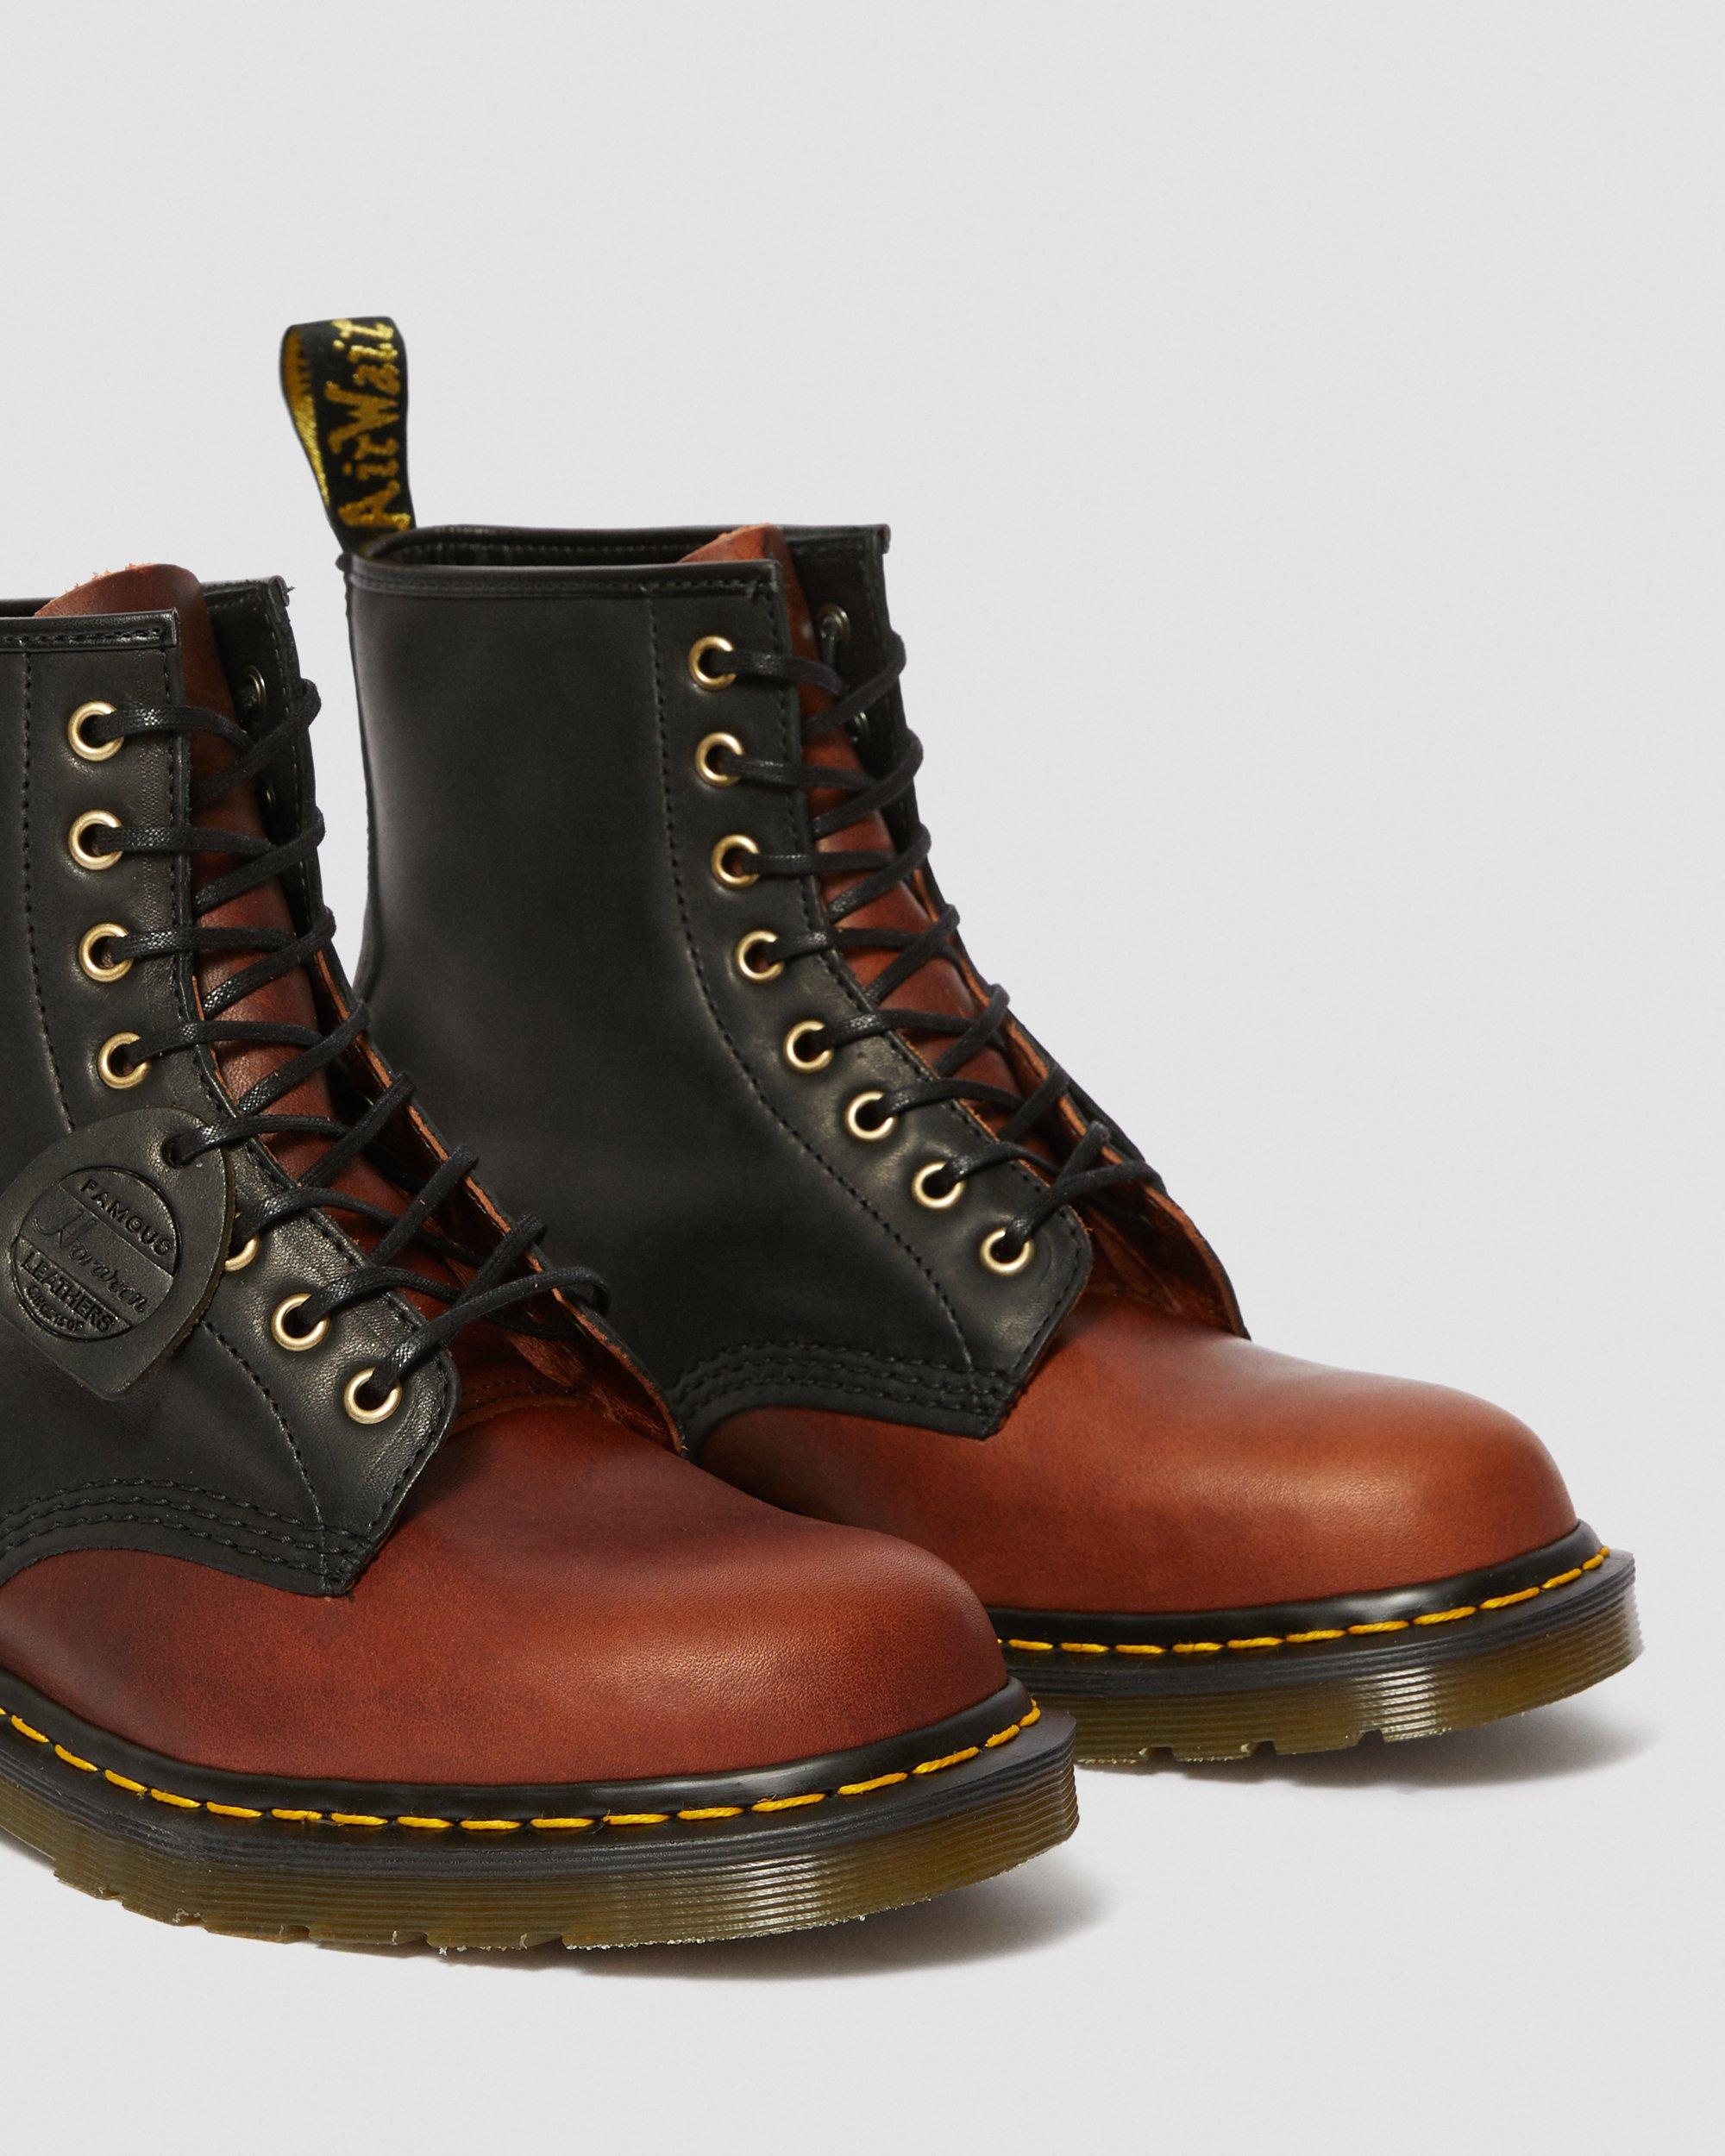 IN ENGLAND HORWEEN LEATHER BOOTS 